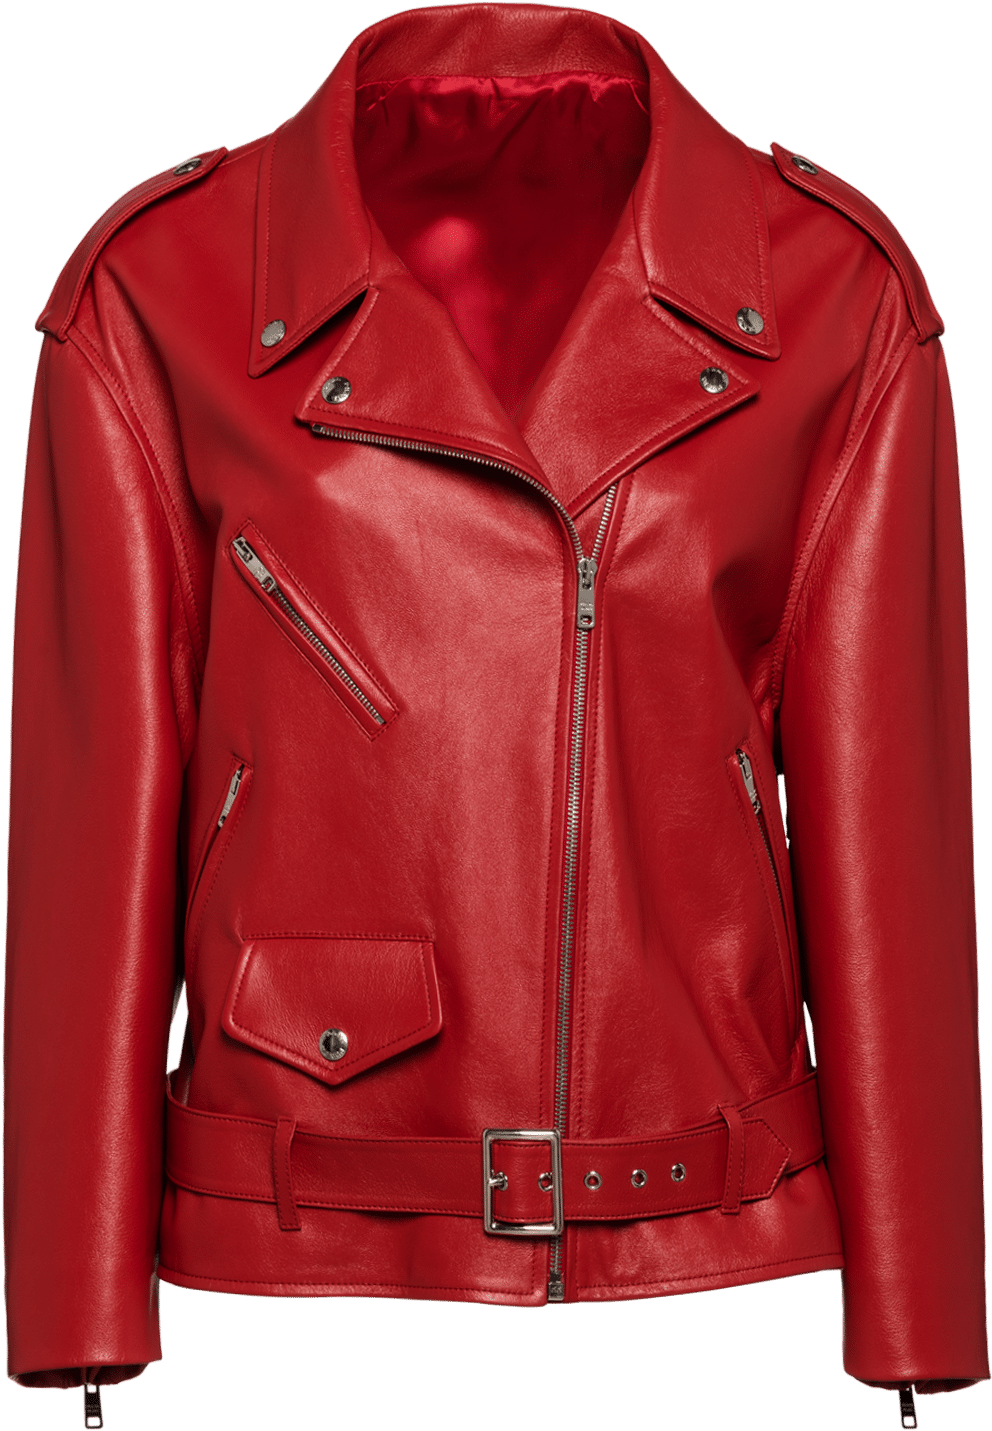 Download Leather Jacket PNG Image with No Background - PNGkey.com